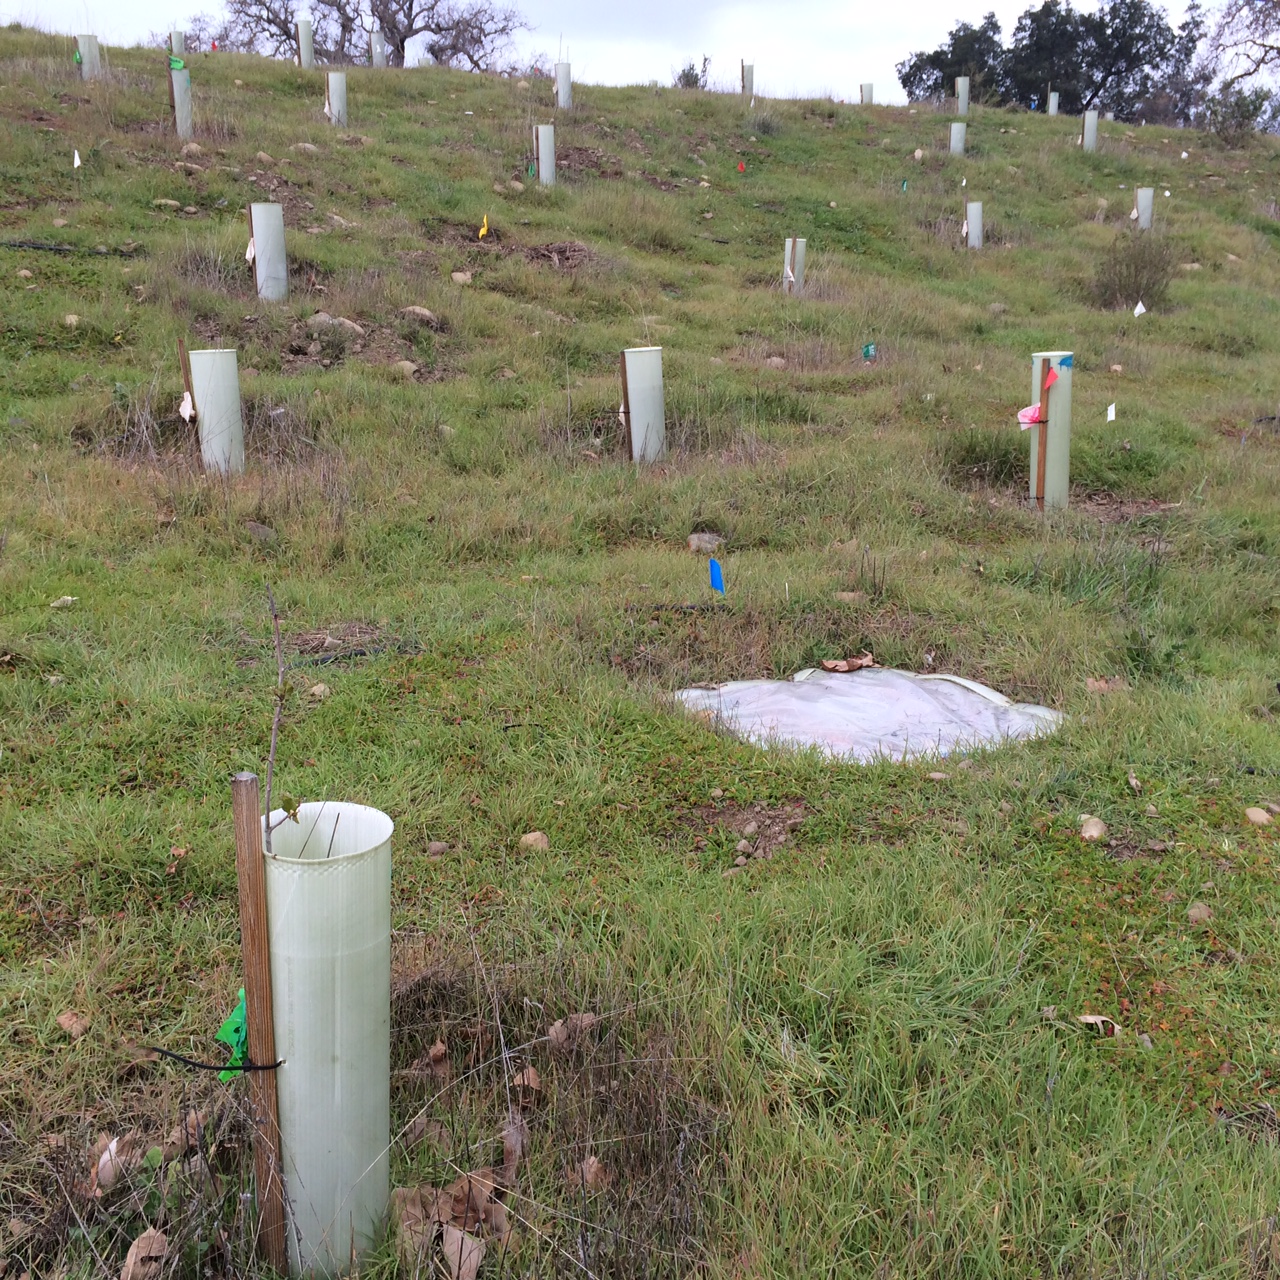 The SFPUC had to raze 9,000 plants that tested positive for phytopthora, a costly setback for the agency. Photo courtesy of SFPUC